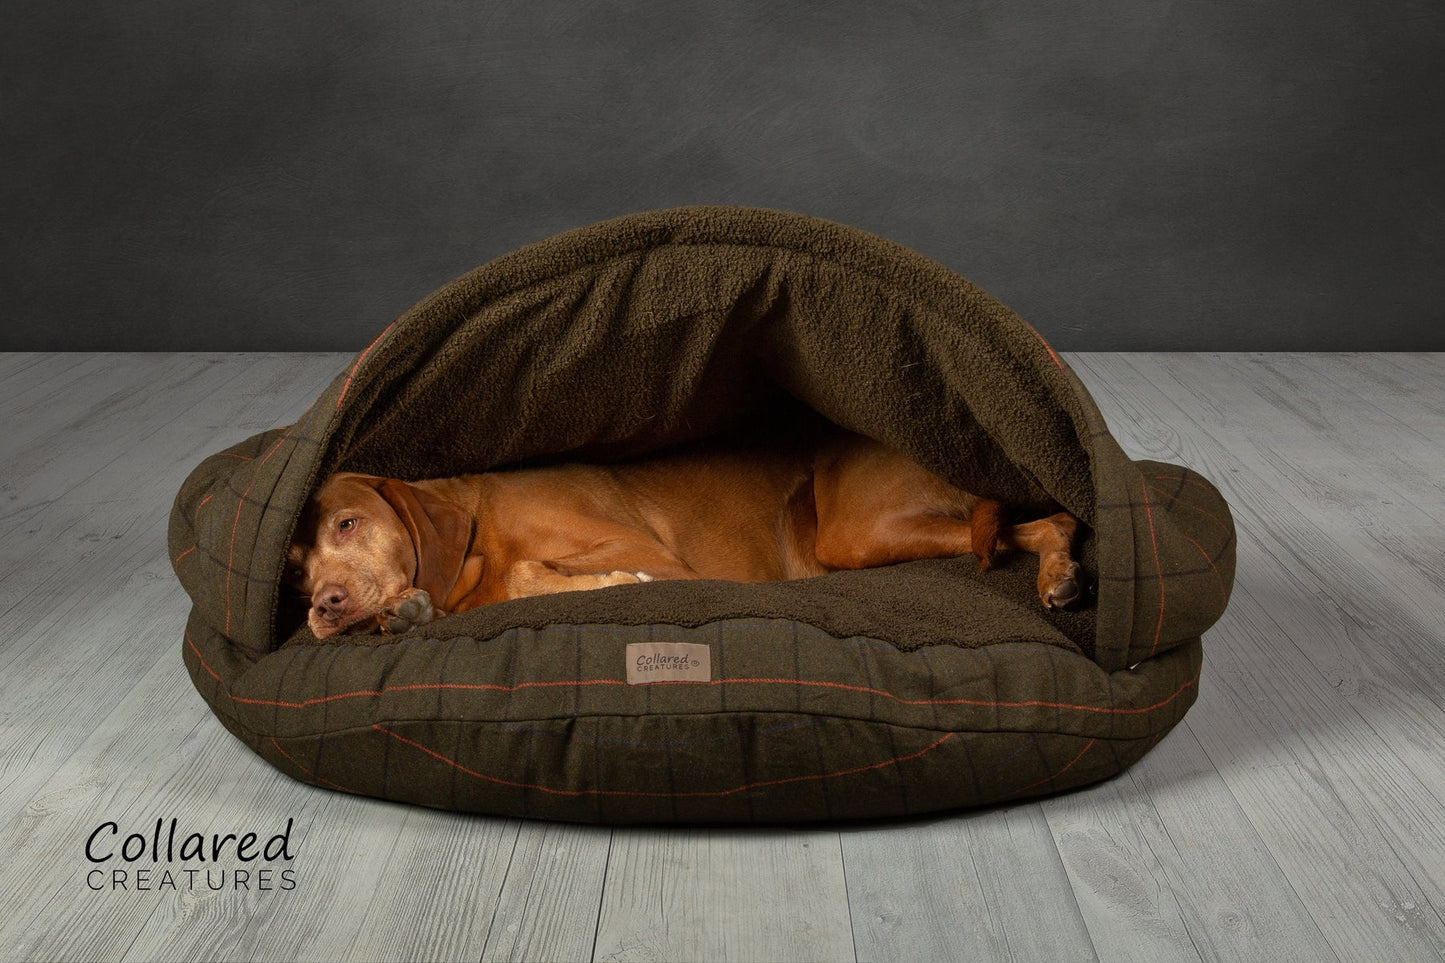 Collared Creatures Luxury Dog Cave Bed with removable Rigid Hood